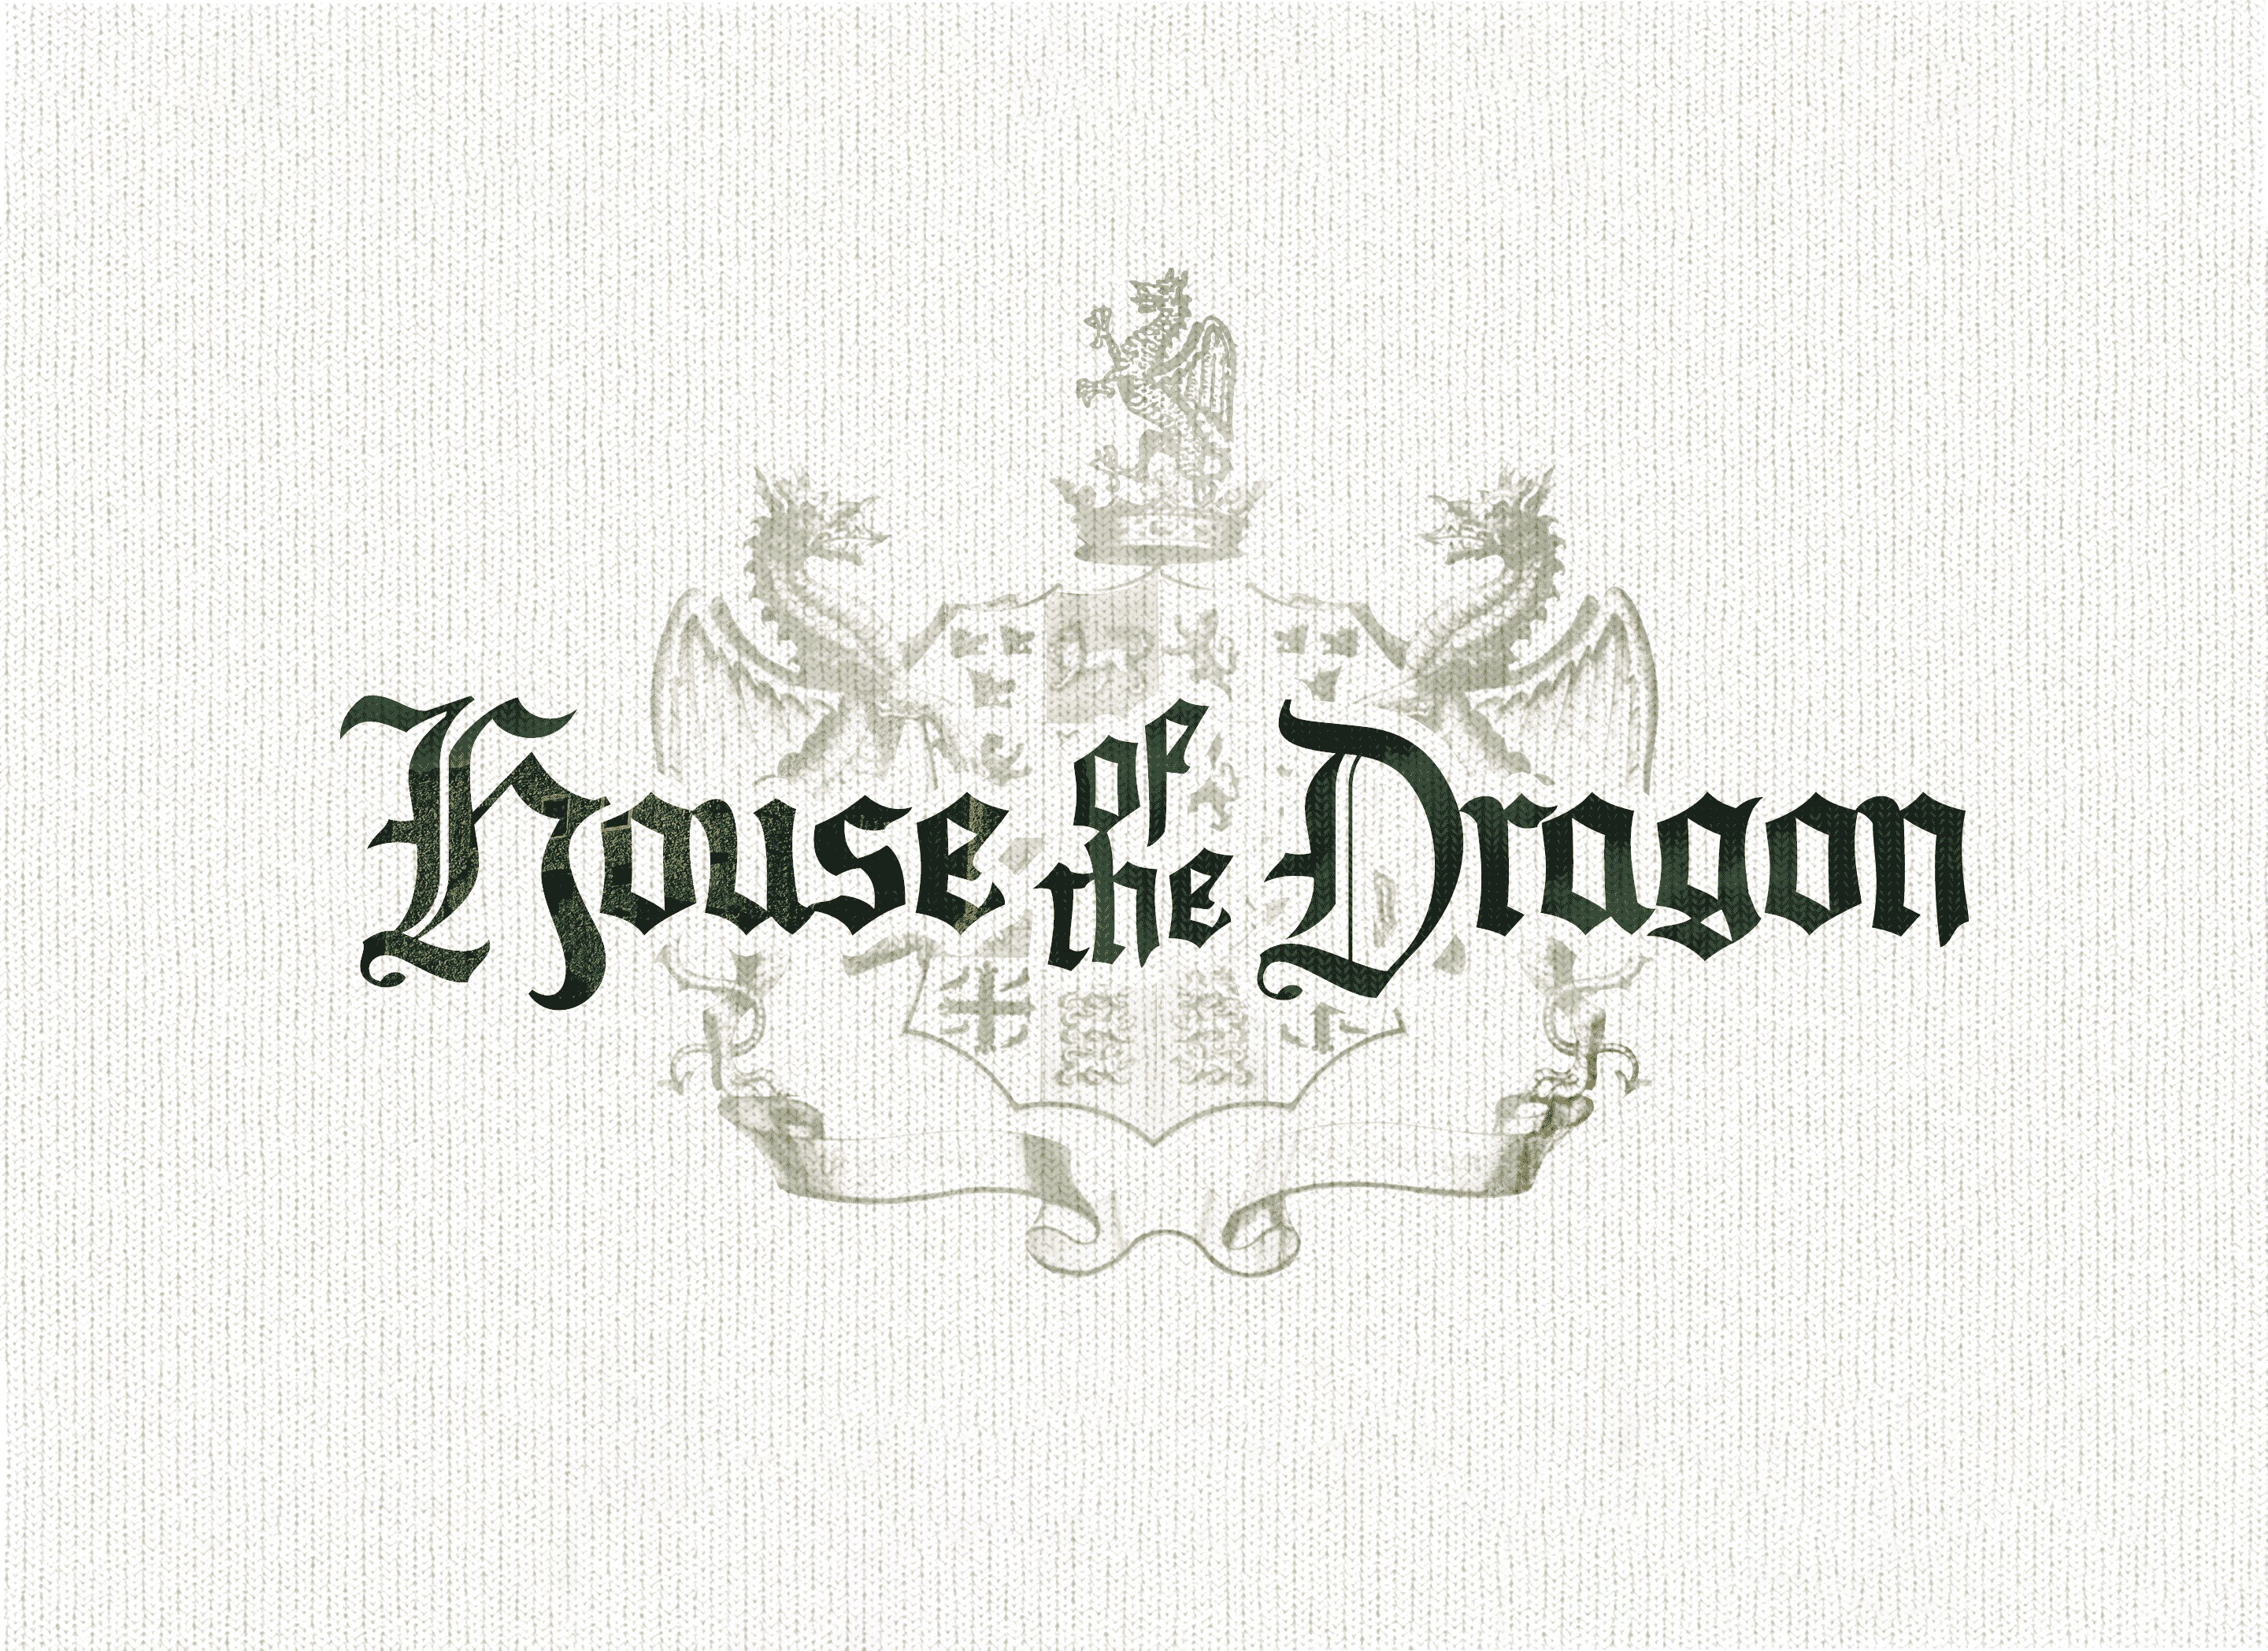 Game of Thrones - the Great Houses Logos #1 on Behance